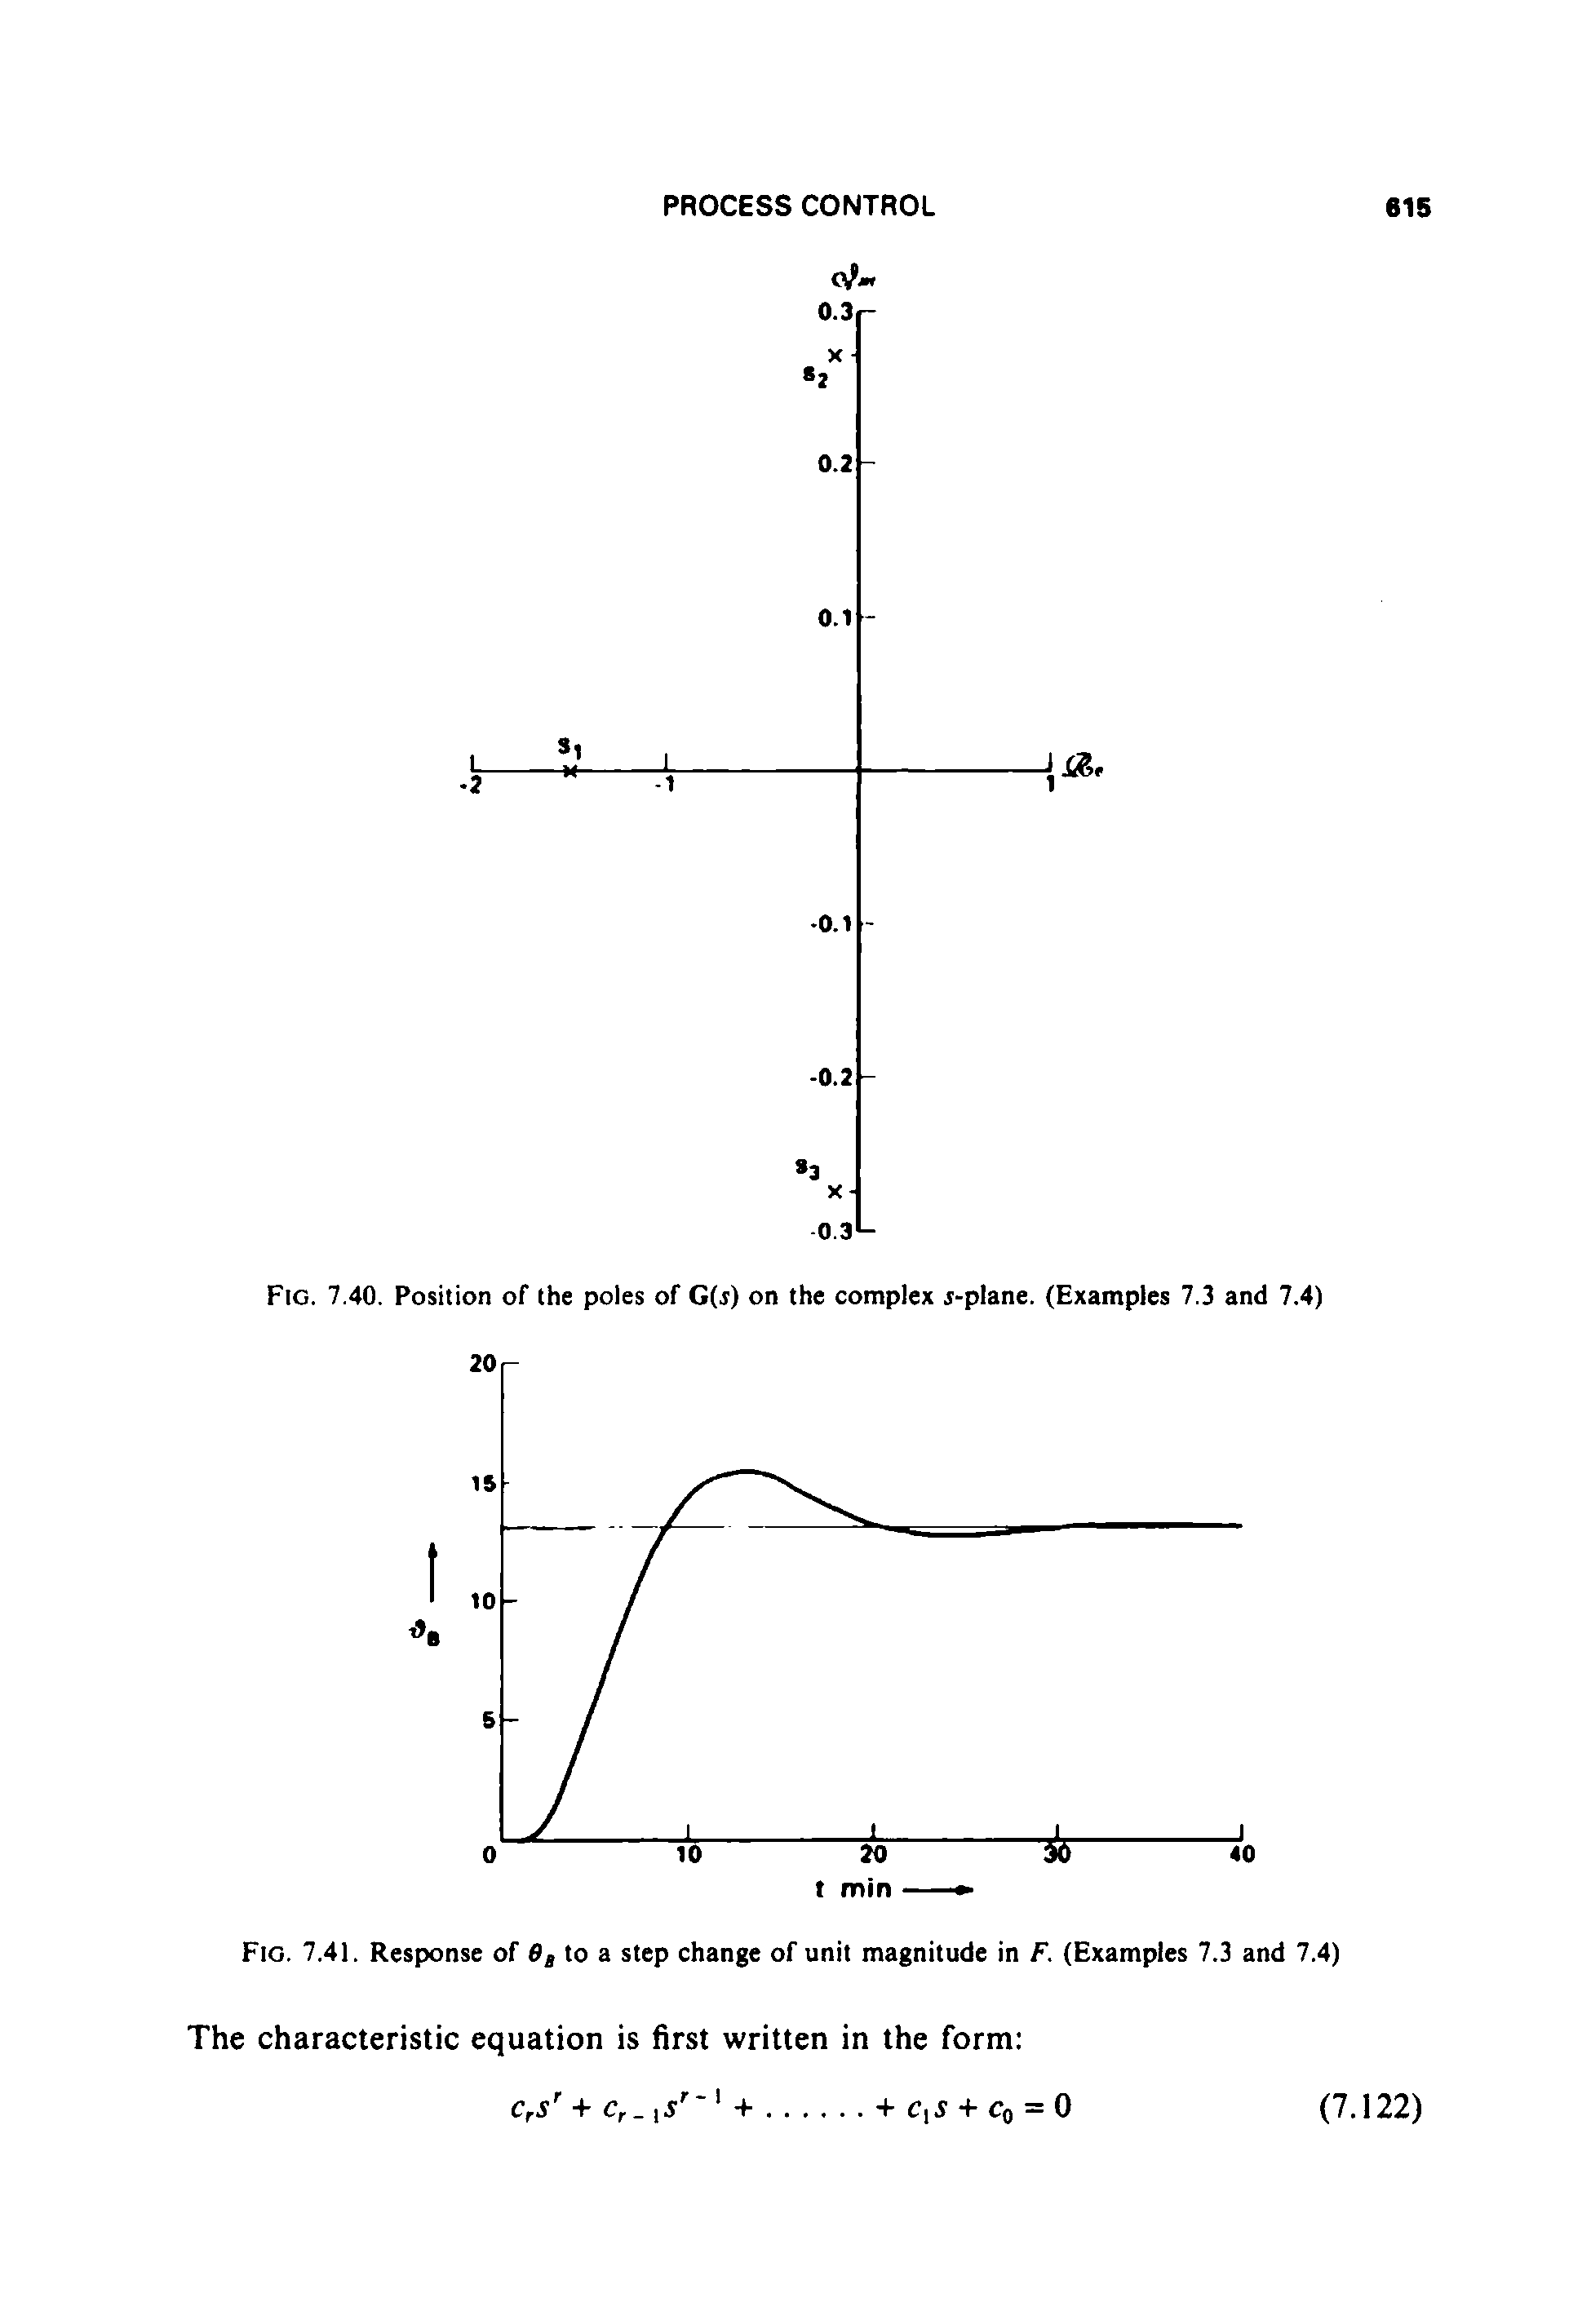 Fig. 7.41. Response of 6t to a step change of unit magnitude in F. (Examples 7.3 and 7.4)...